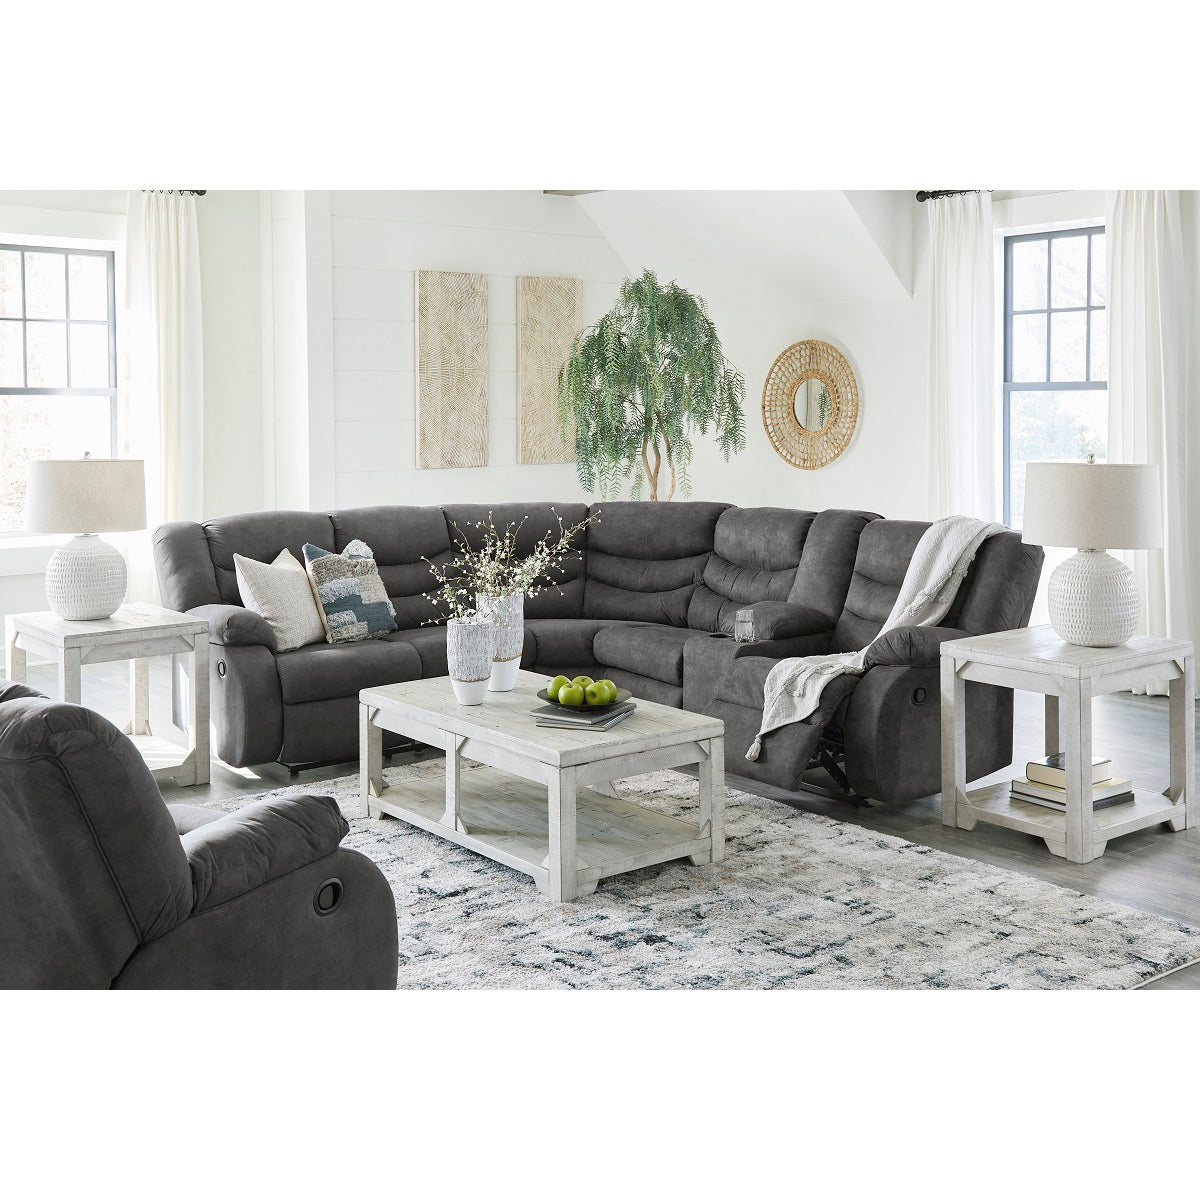 Partymate 2pc Reclining Sectional With